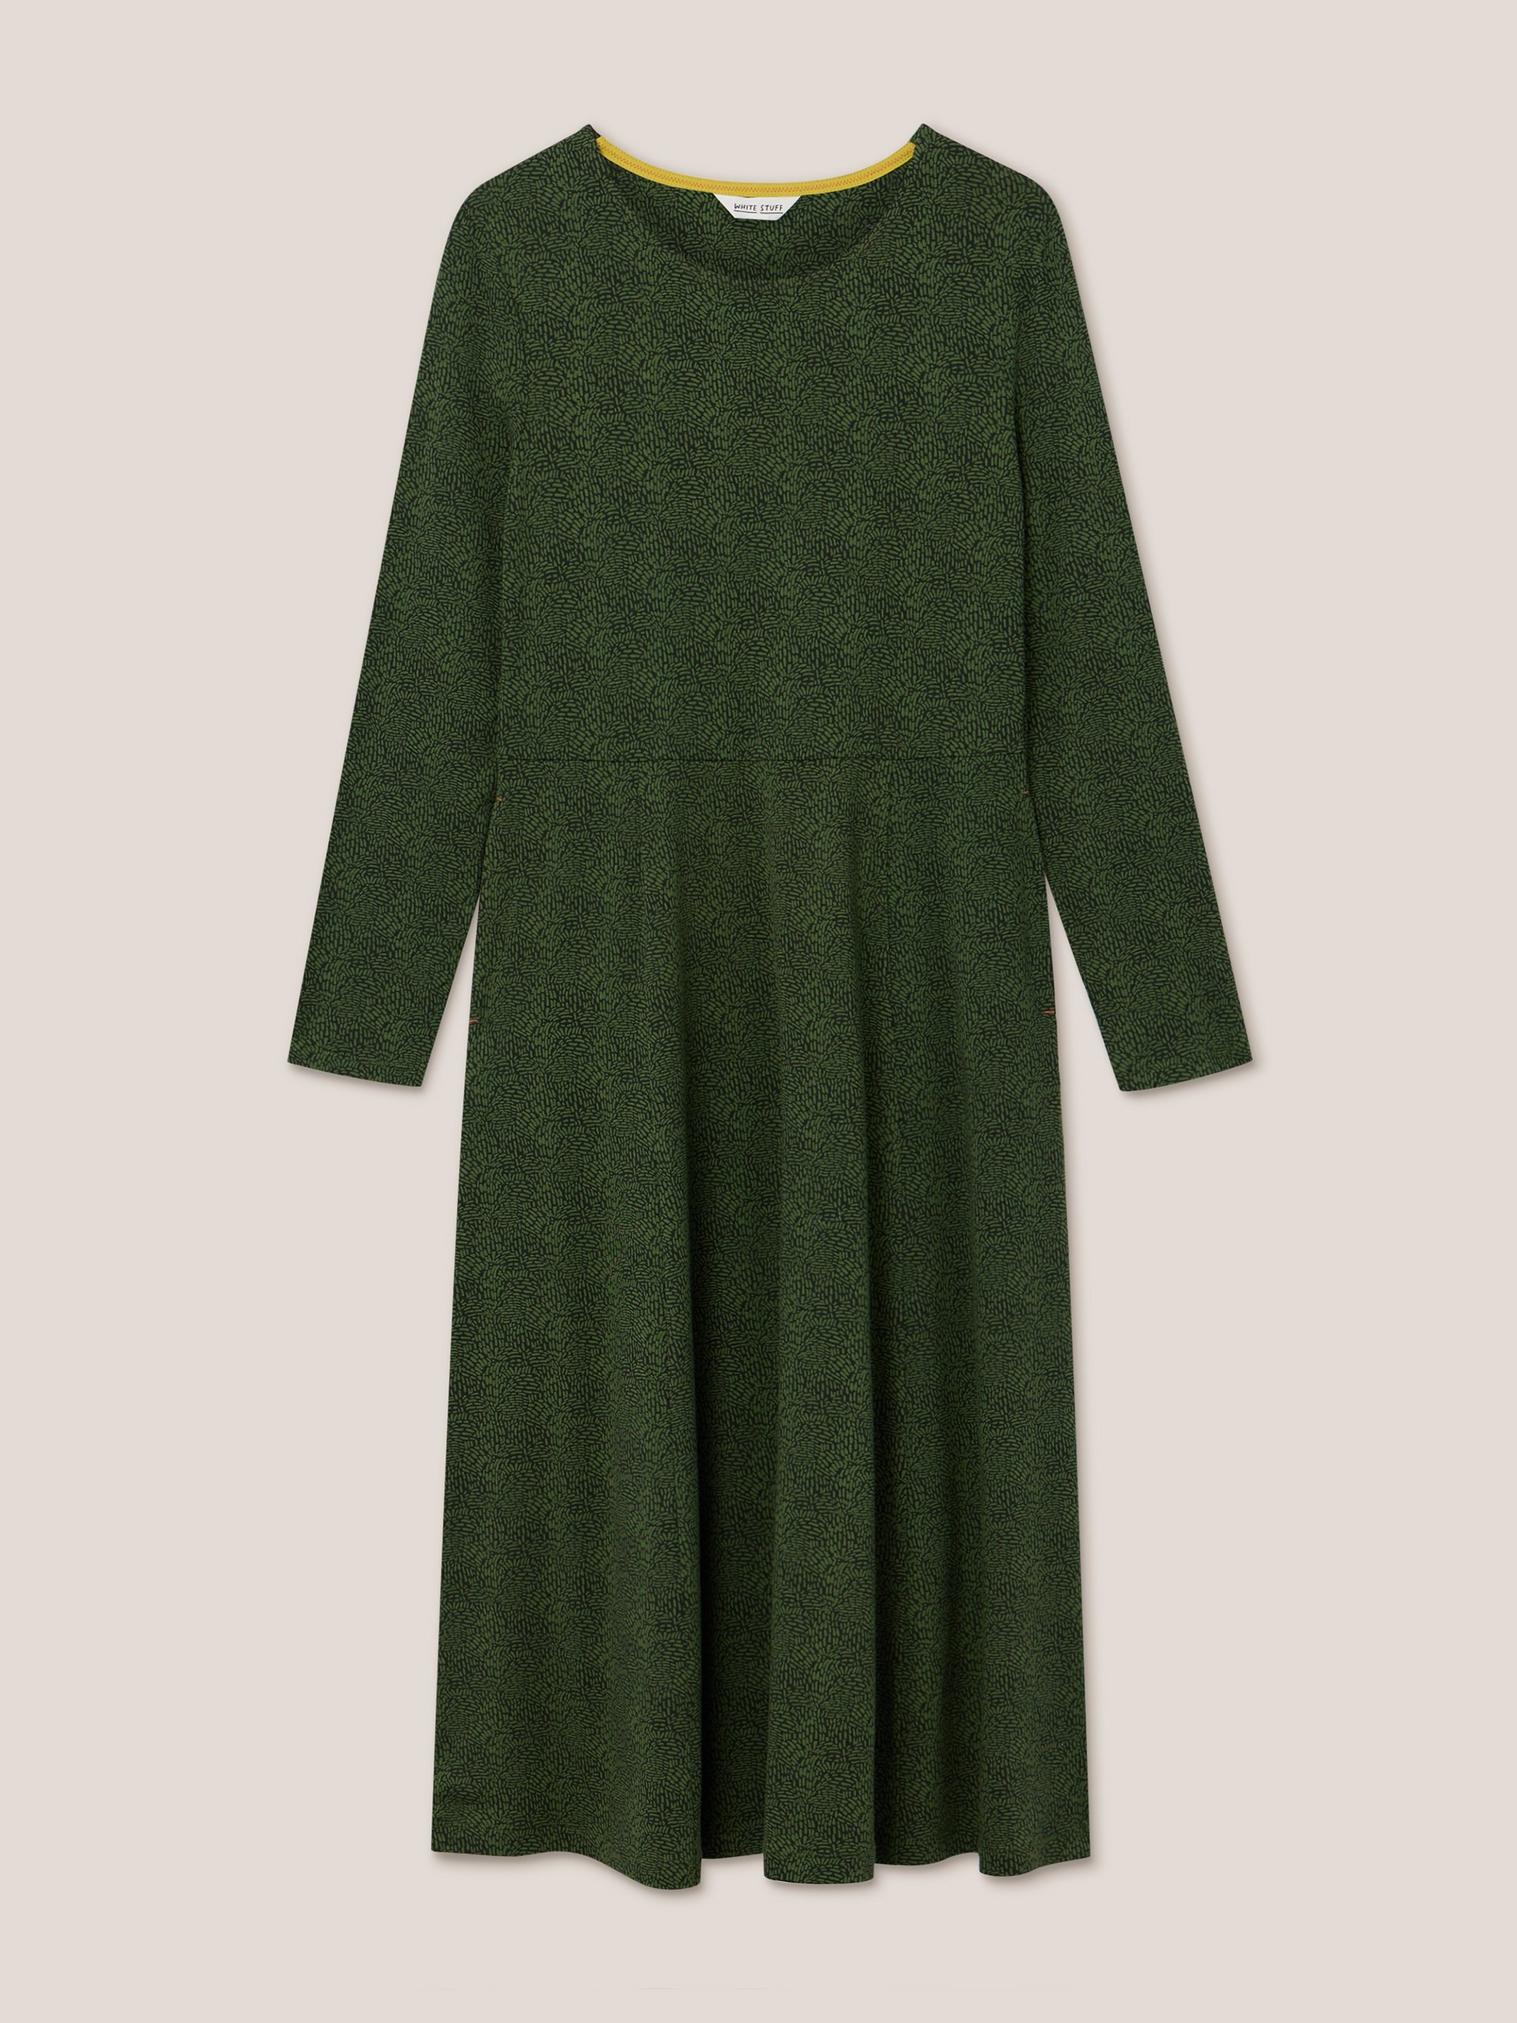 Madeline Classic Jersey Dress in GREEN PR - FLAT FRONT